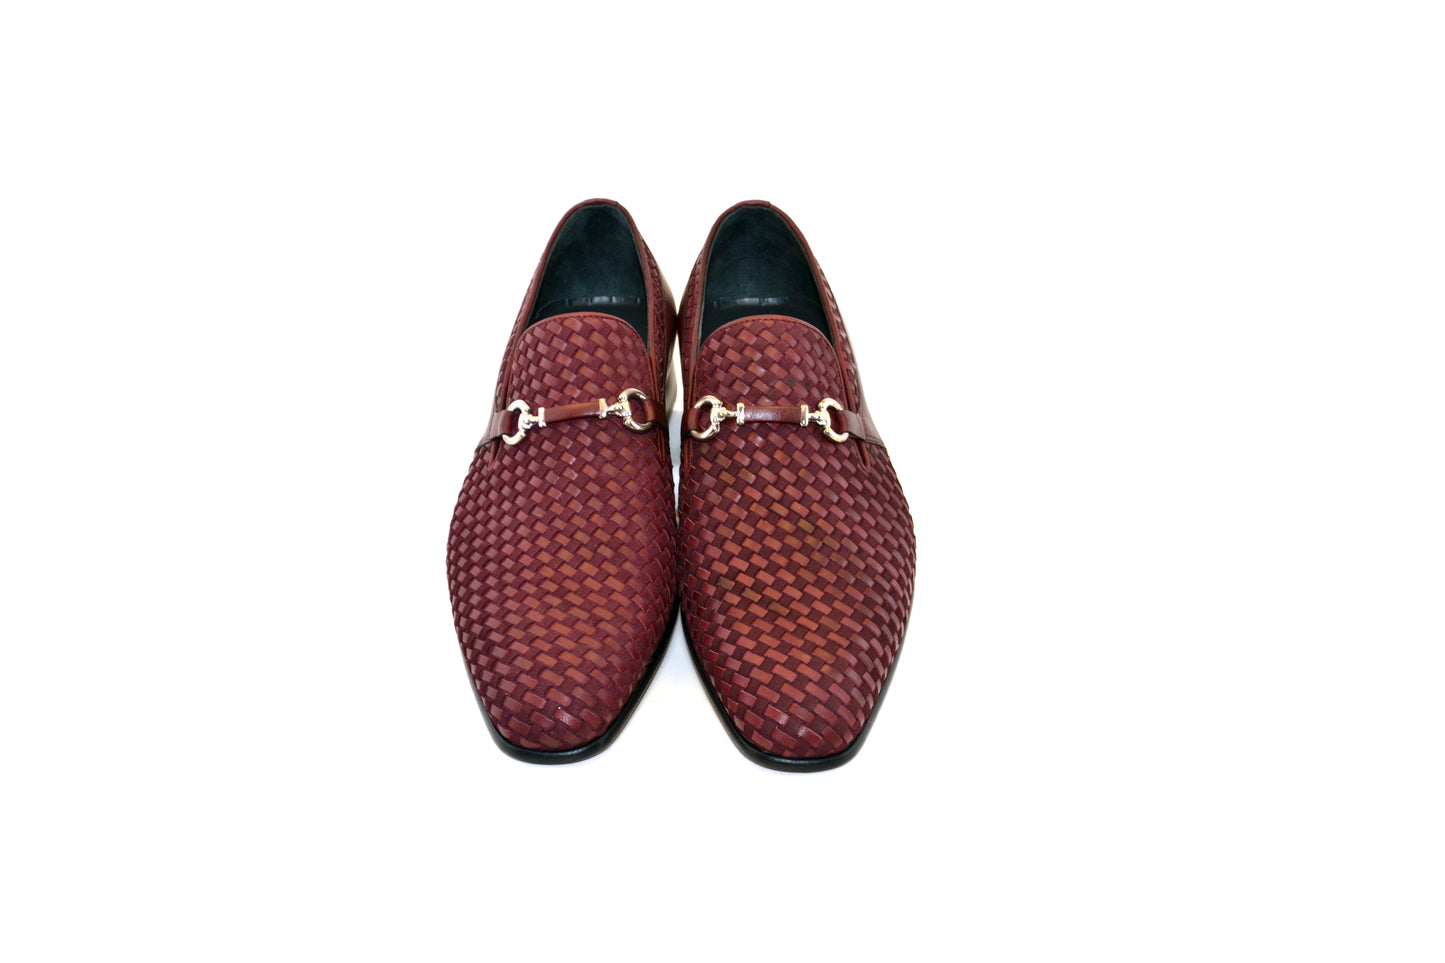 C0222-5776 hand Made Woven Loafer Burgundy